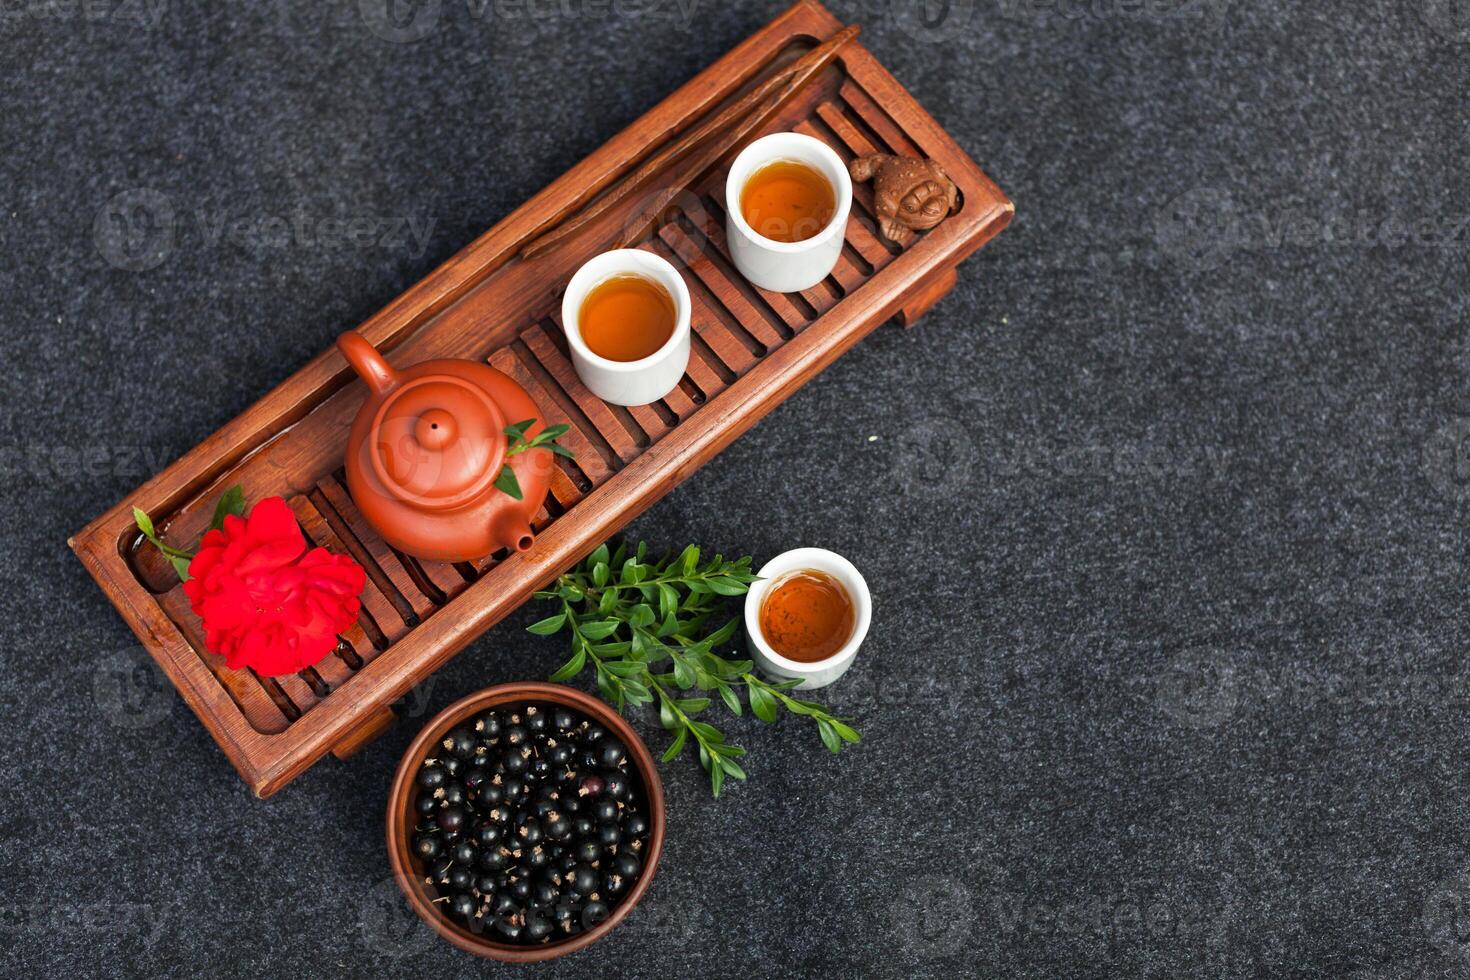 Traditional Chinese tea ceremony with black currant, fruit tea and healthy food. Photo without people. Summer natural vitamins and berries